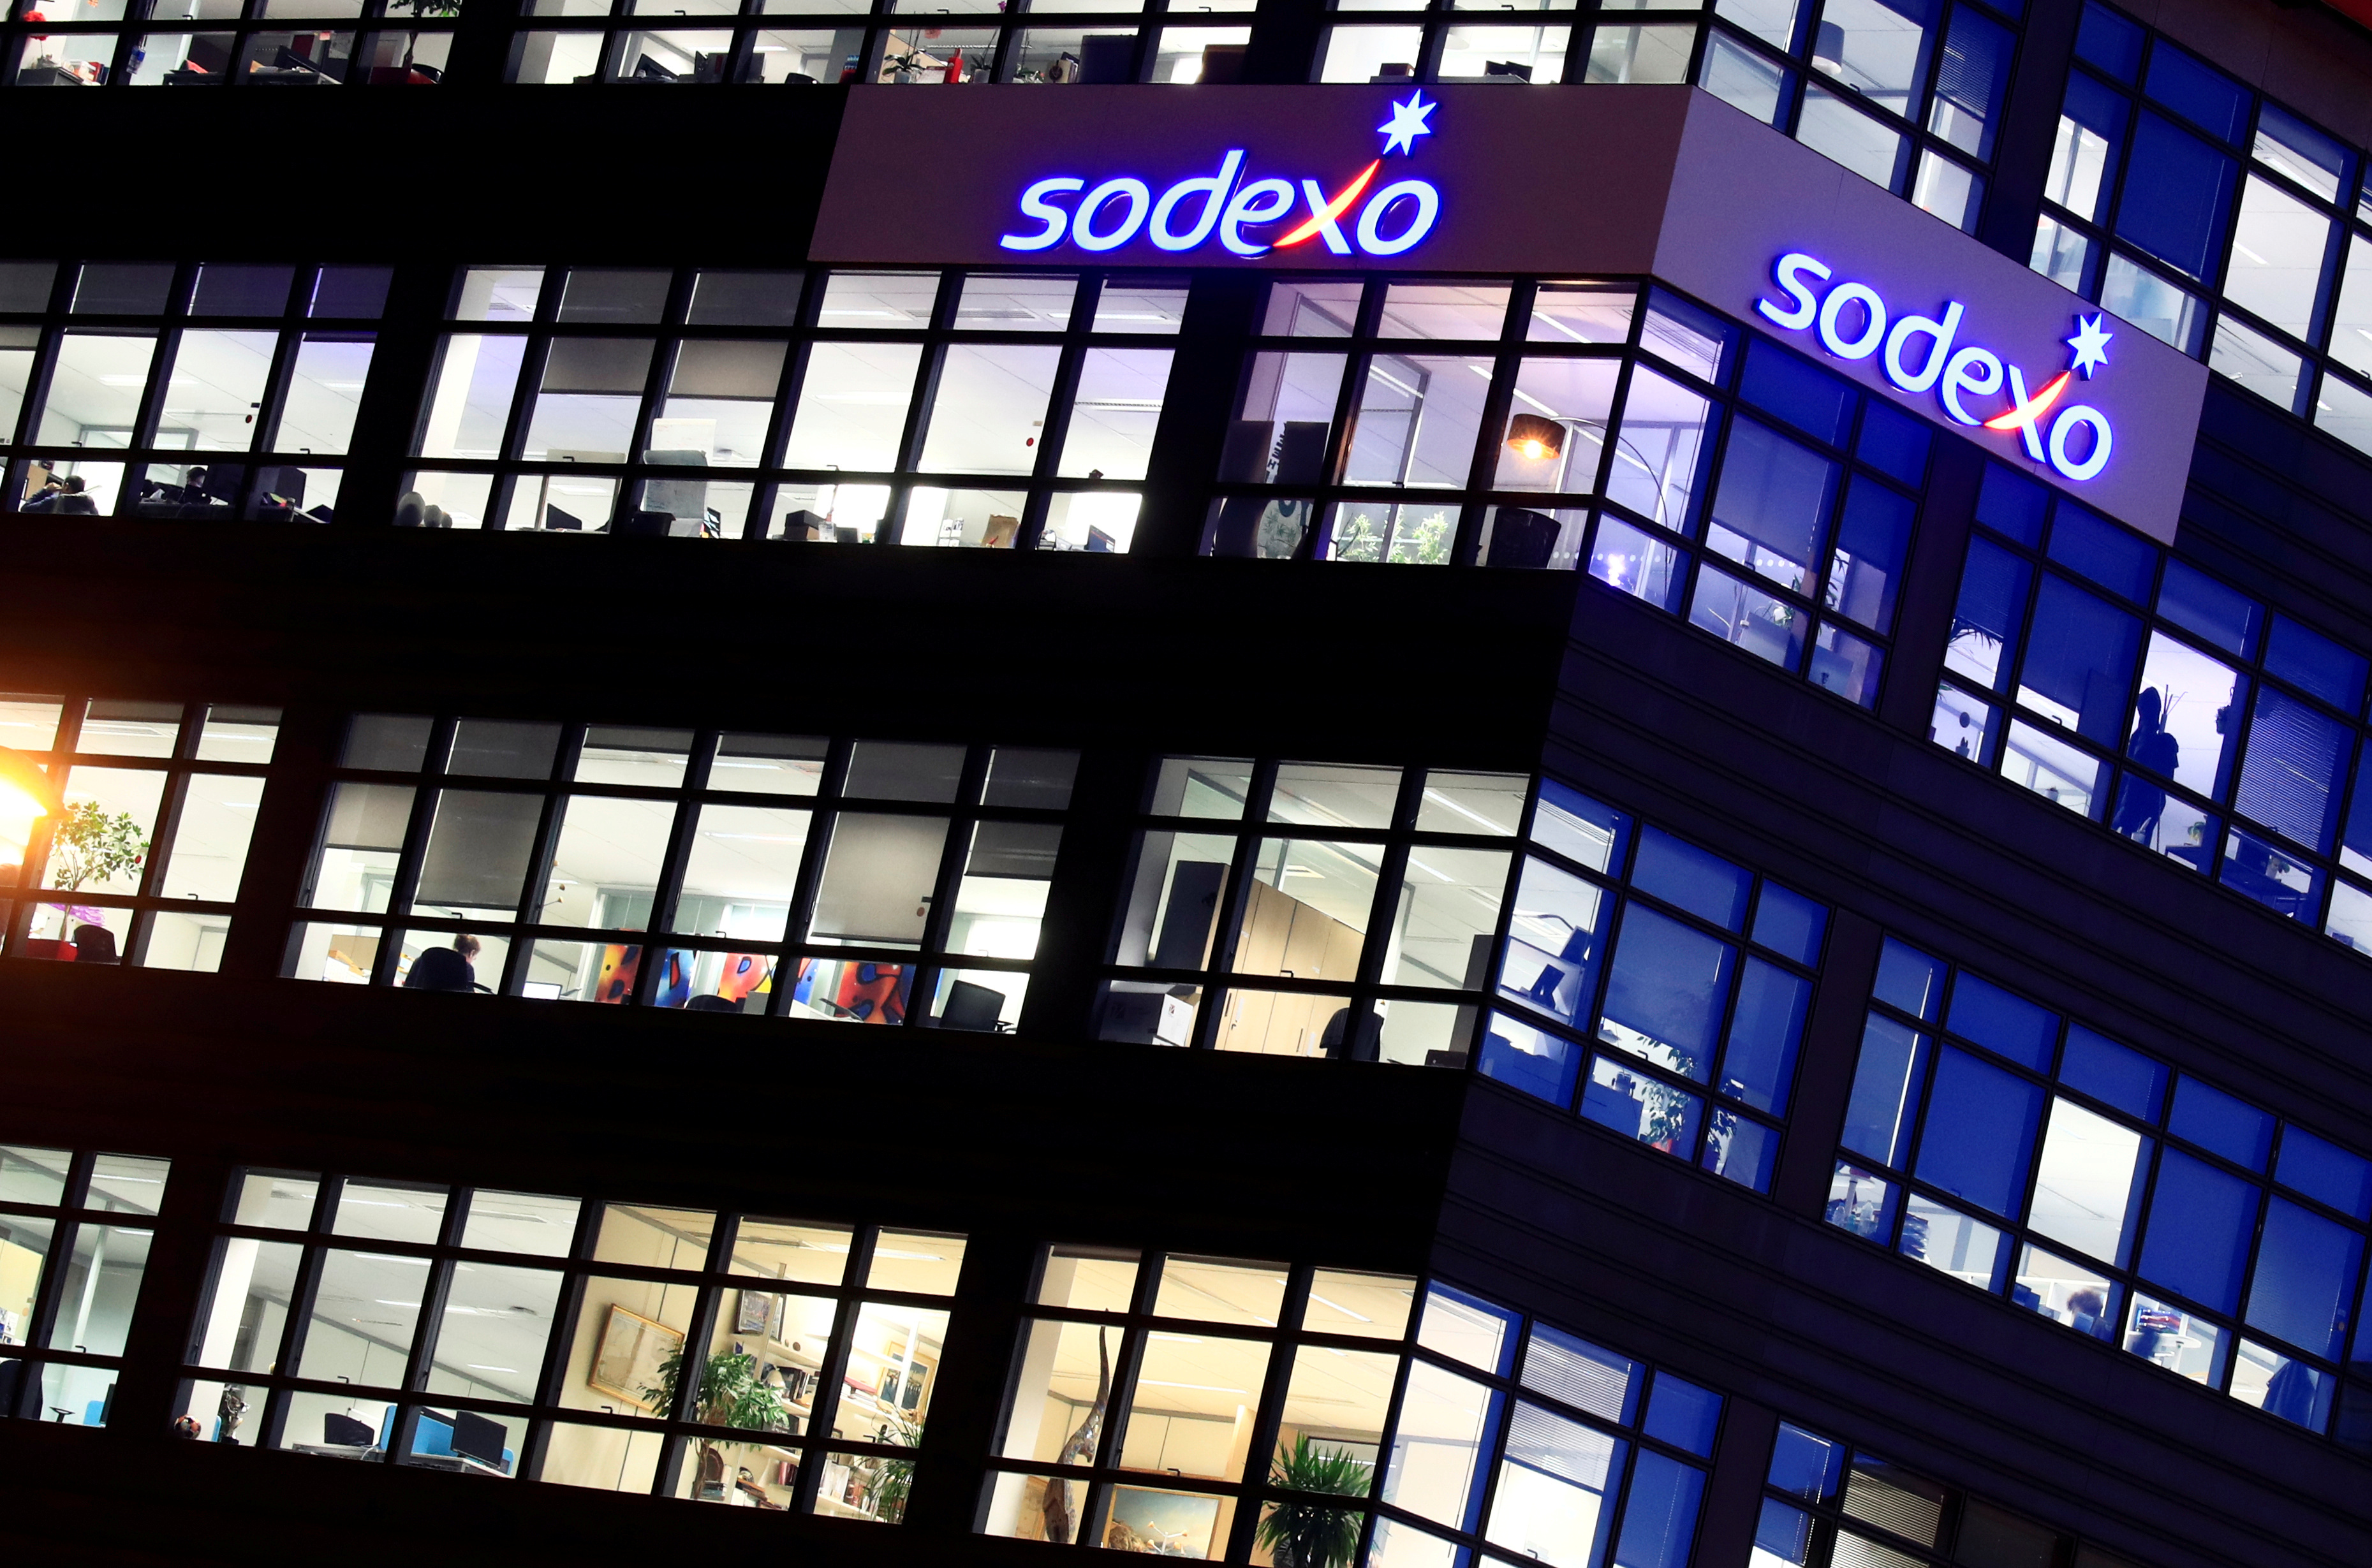 The logo of French food services and facilities management group Sodexo is seen at the company headquarters in Issy-les-Moulineaux near Paris